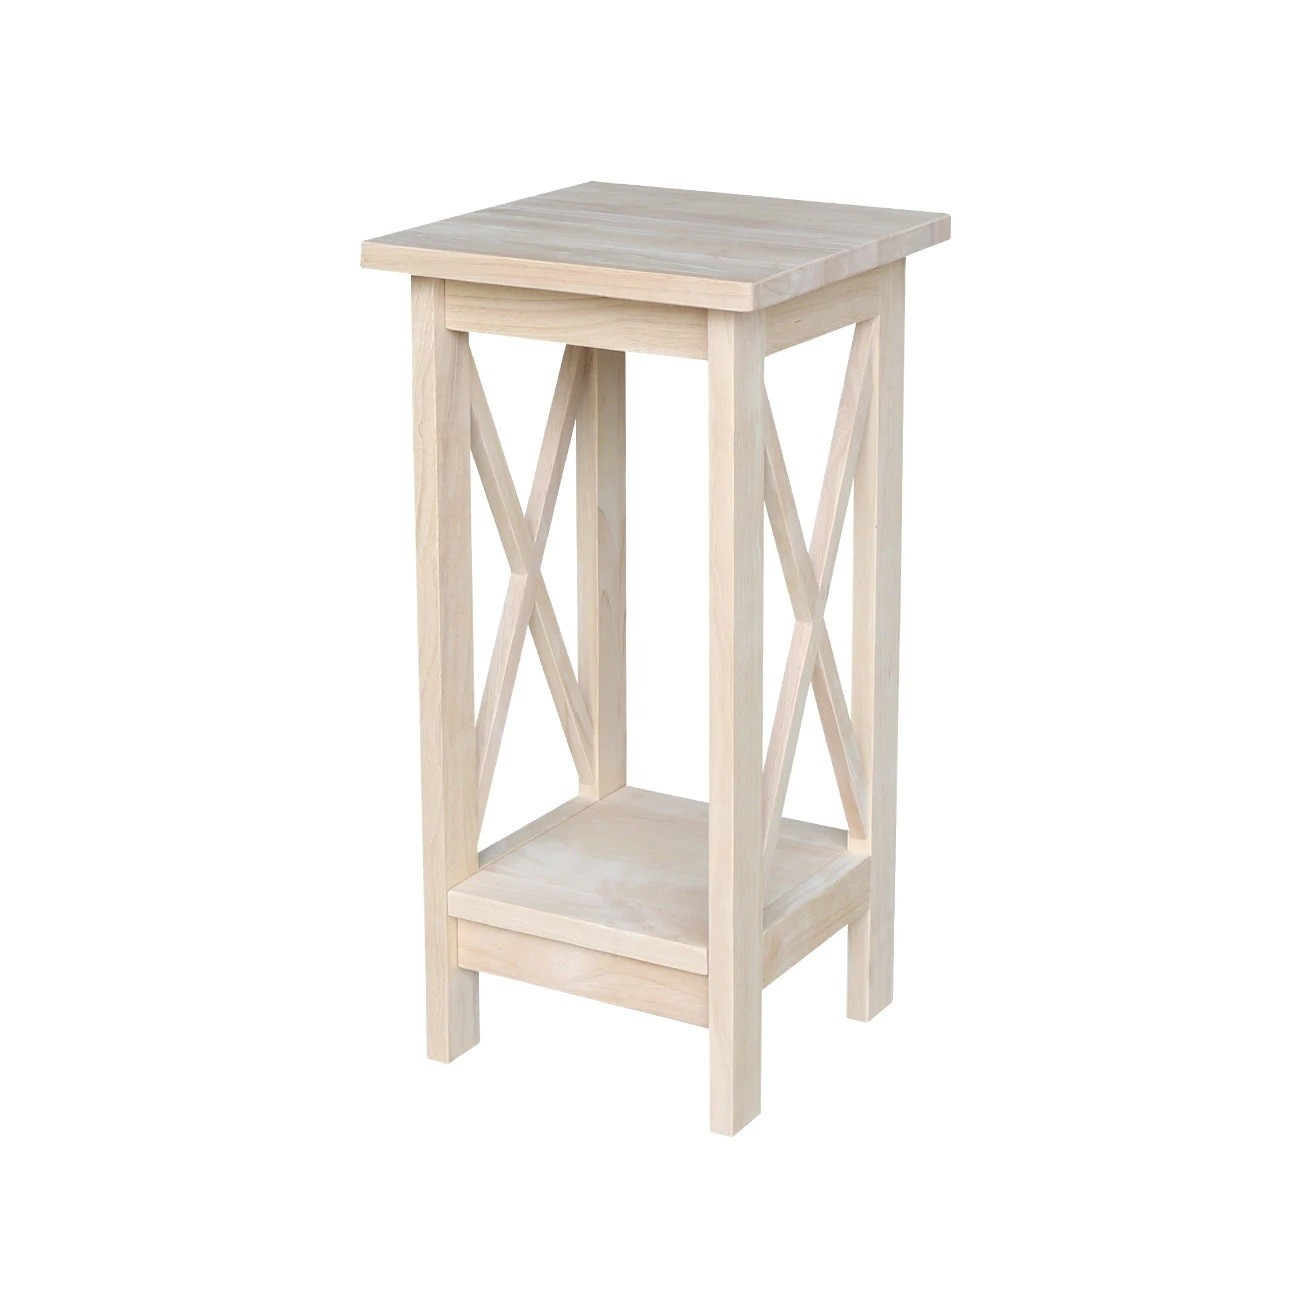 Wood plant stand in lighter finishes